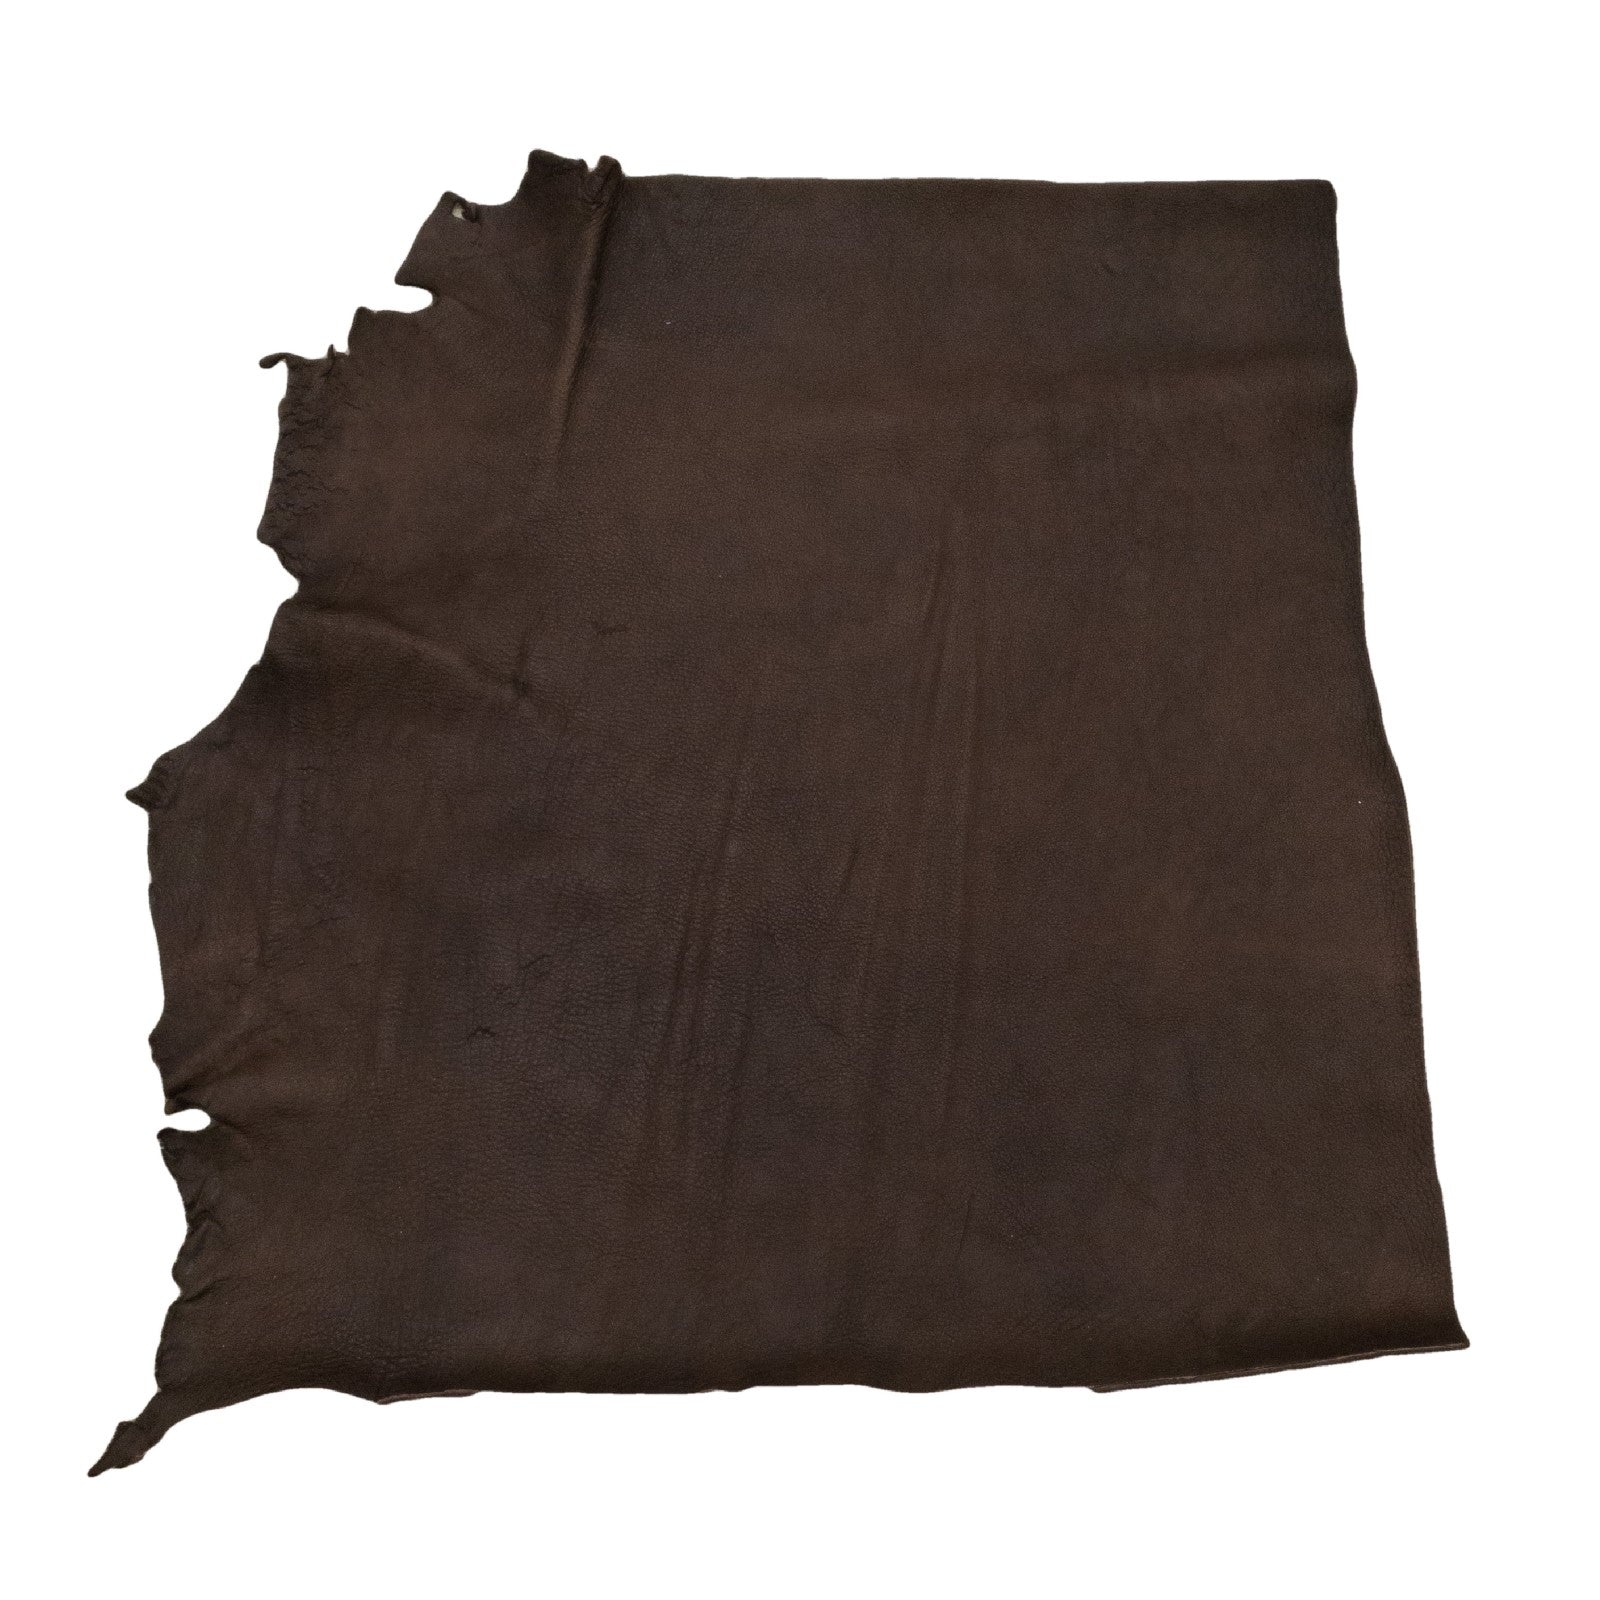 Check-In Chocolate, 7-9 oz, 12-23 SqFt, Flyin' Bison Sides and Project Pieces, Middle Piece / 6.5-7.5 Sq Ft | The Leather Guy